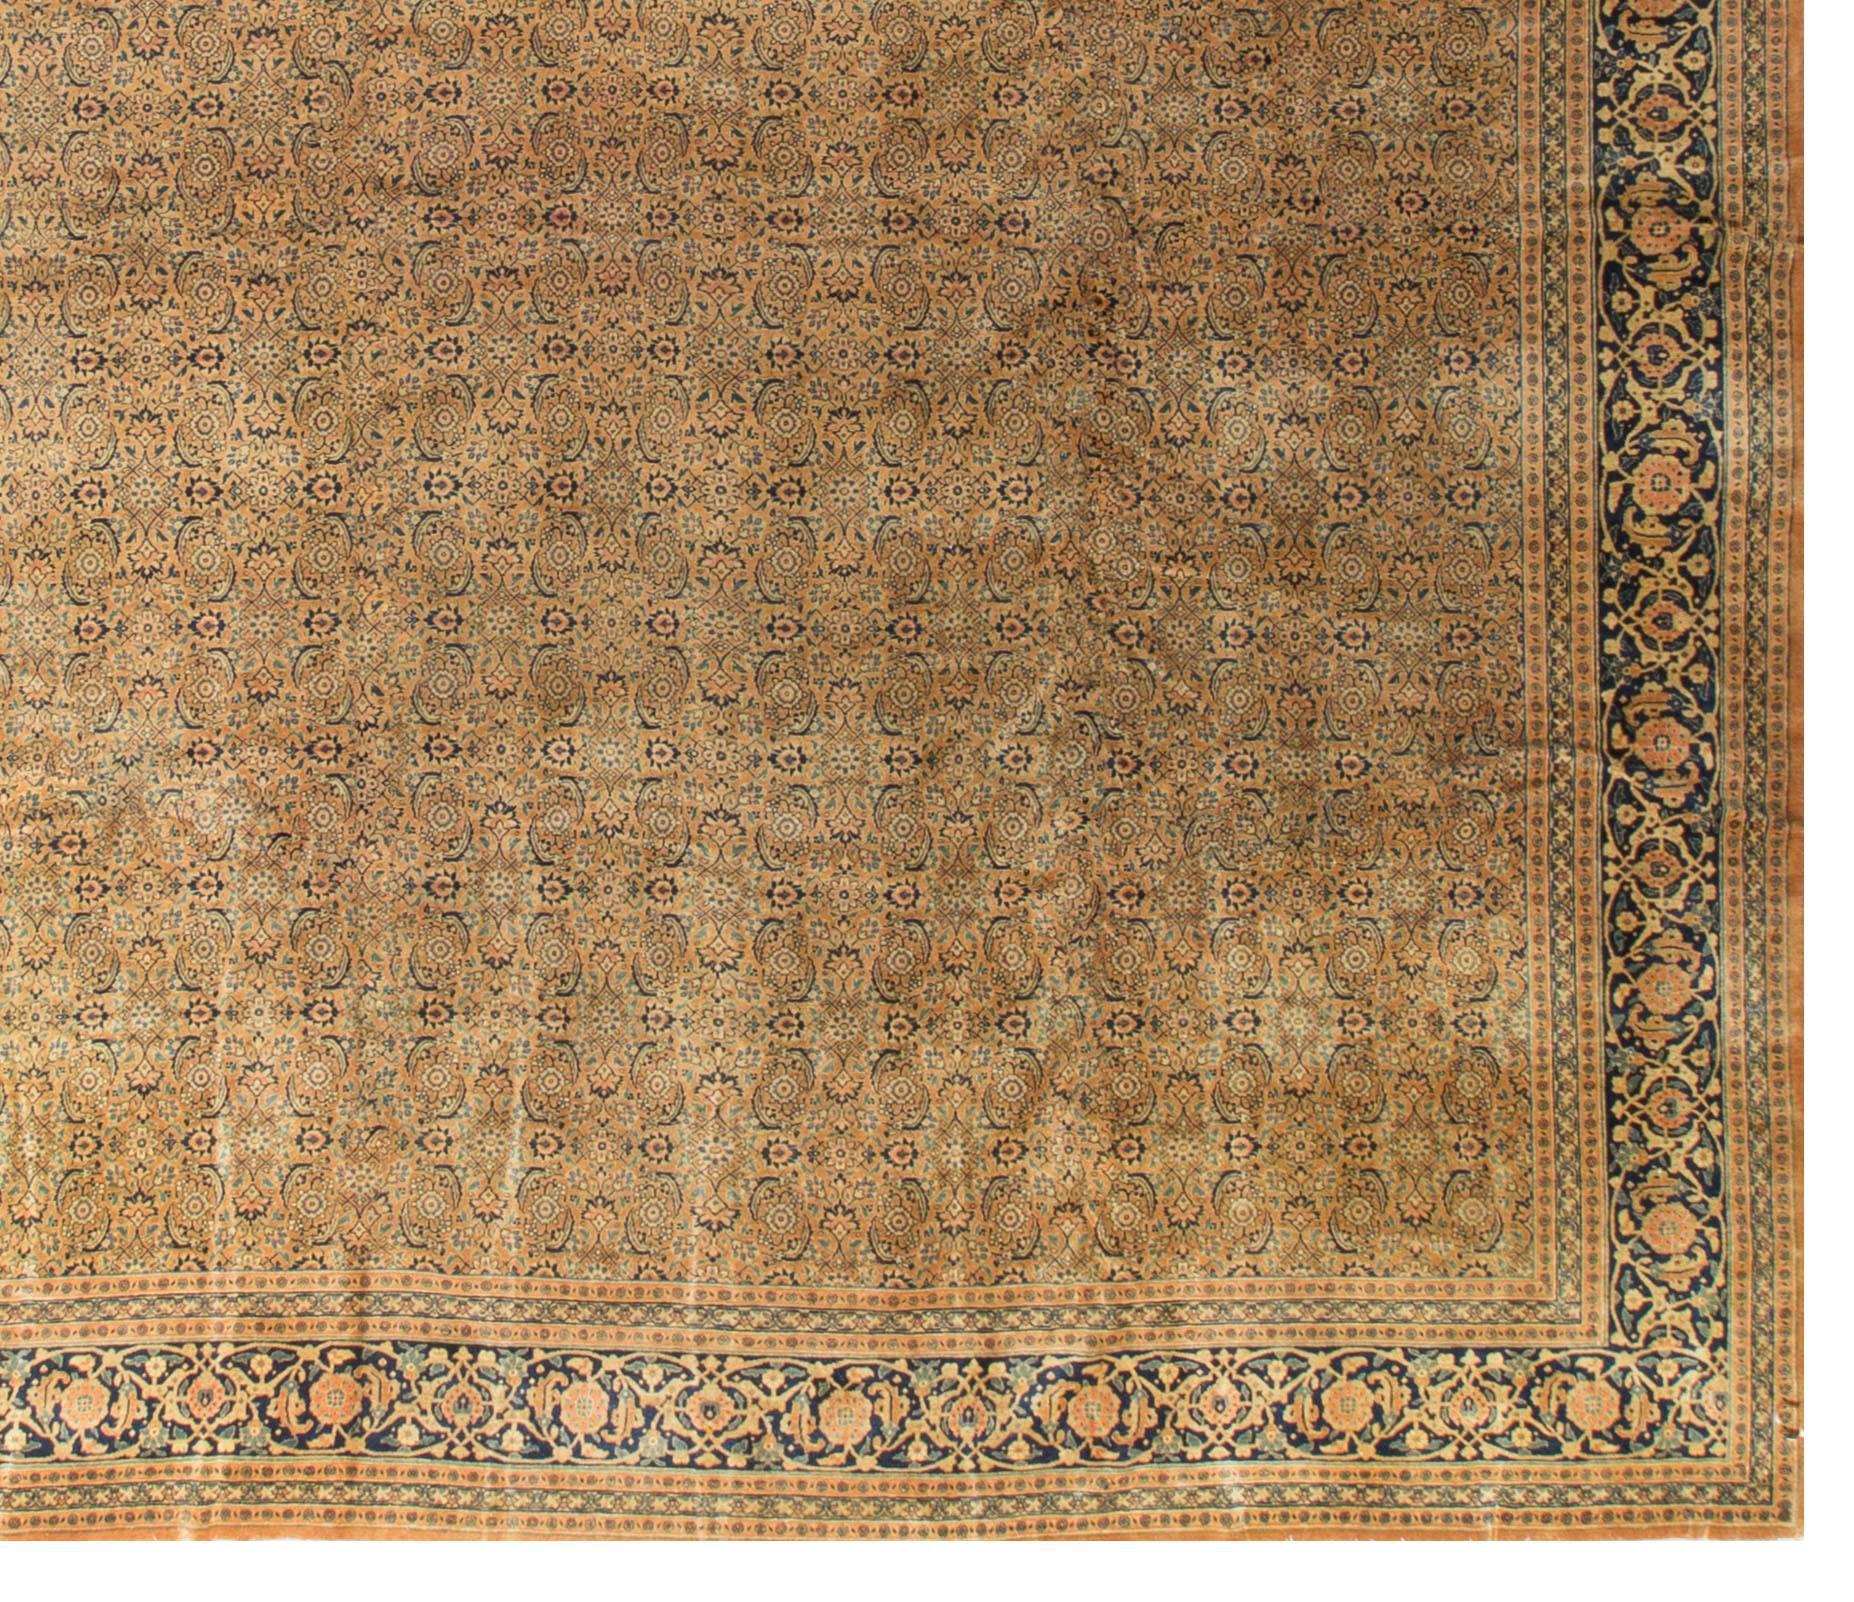 Oversize Persian Tabriz Rug Carpet, circa 1930. The Persian carpet revival began in Tabriz, circa 1870 and Tabriz carpet merchants were instrumental in the Renaissance of the craft throughout Iran. Because Tabriz has always been an important Persian